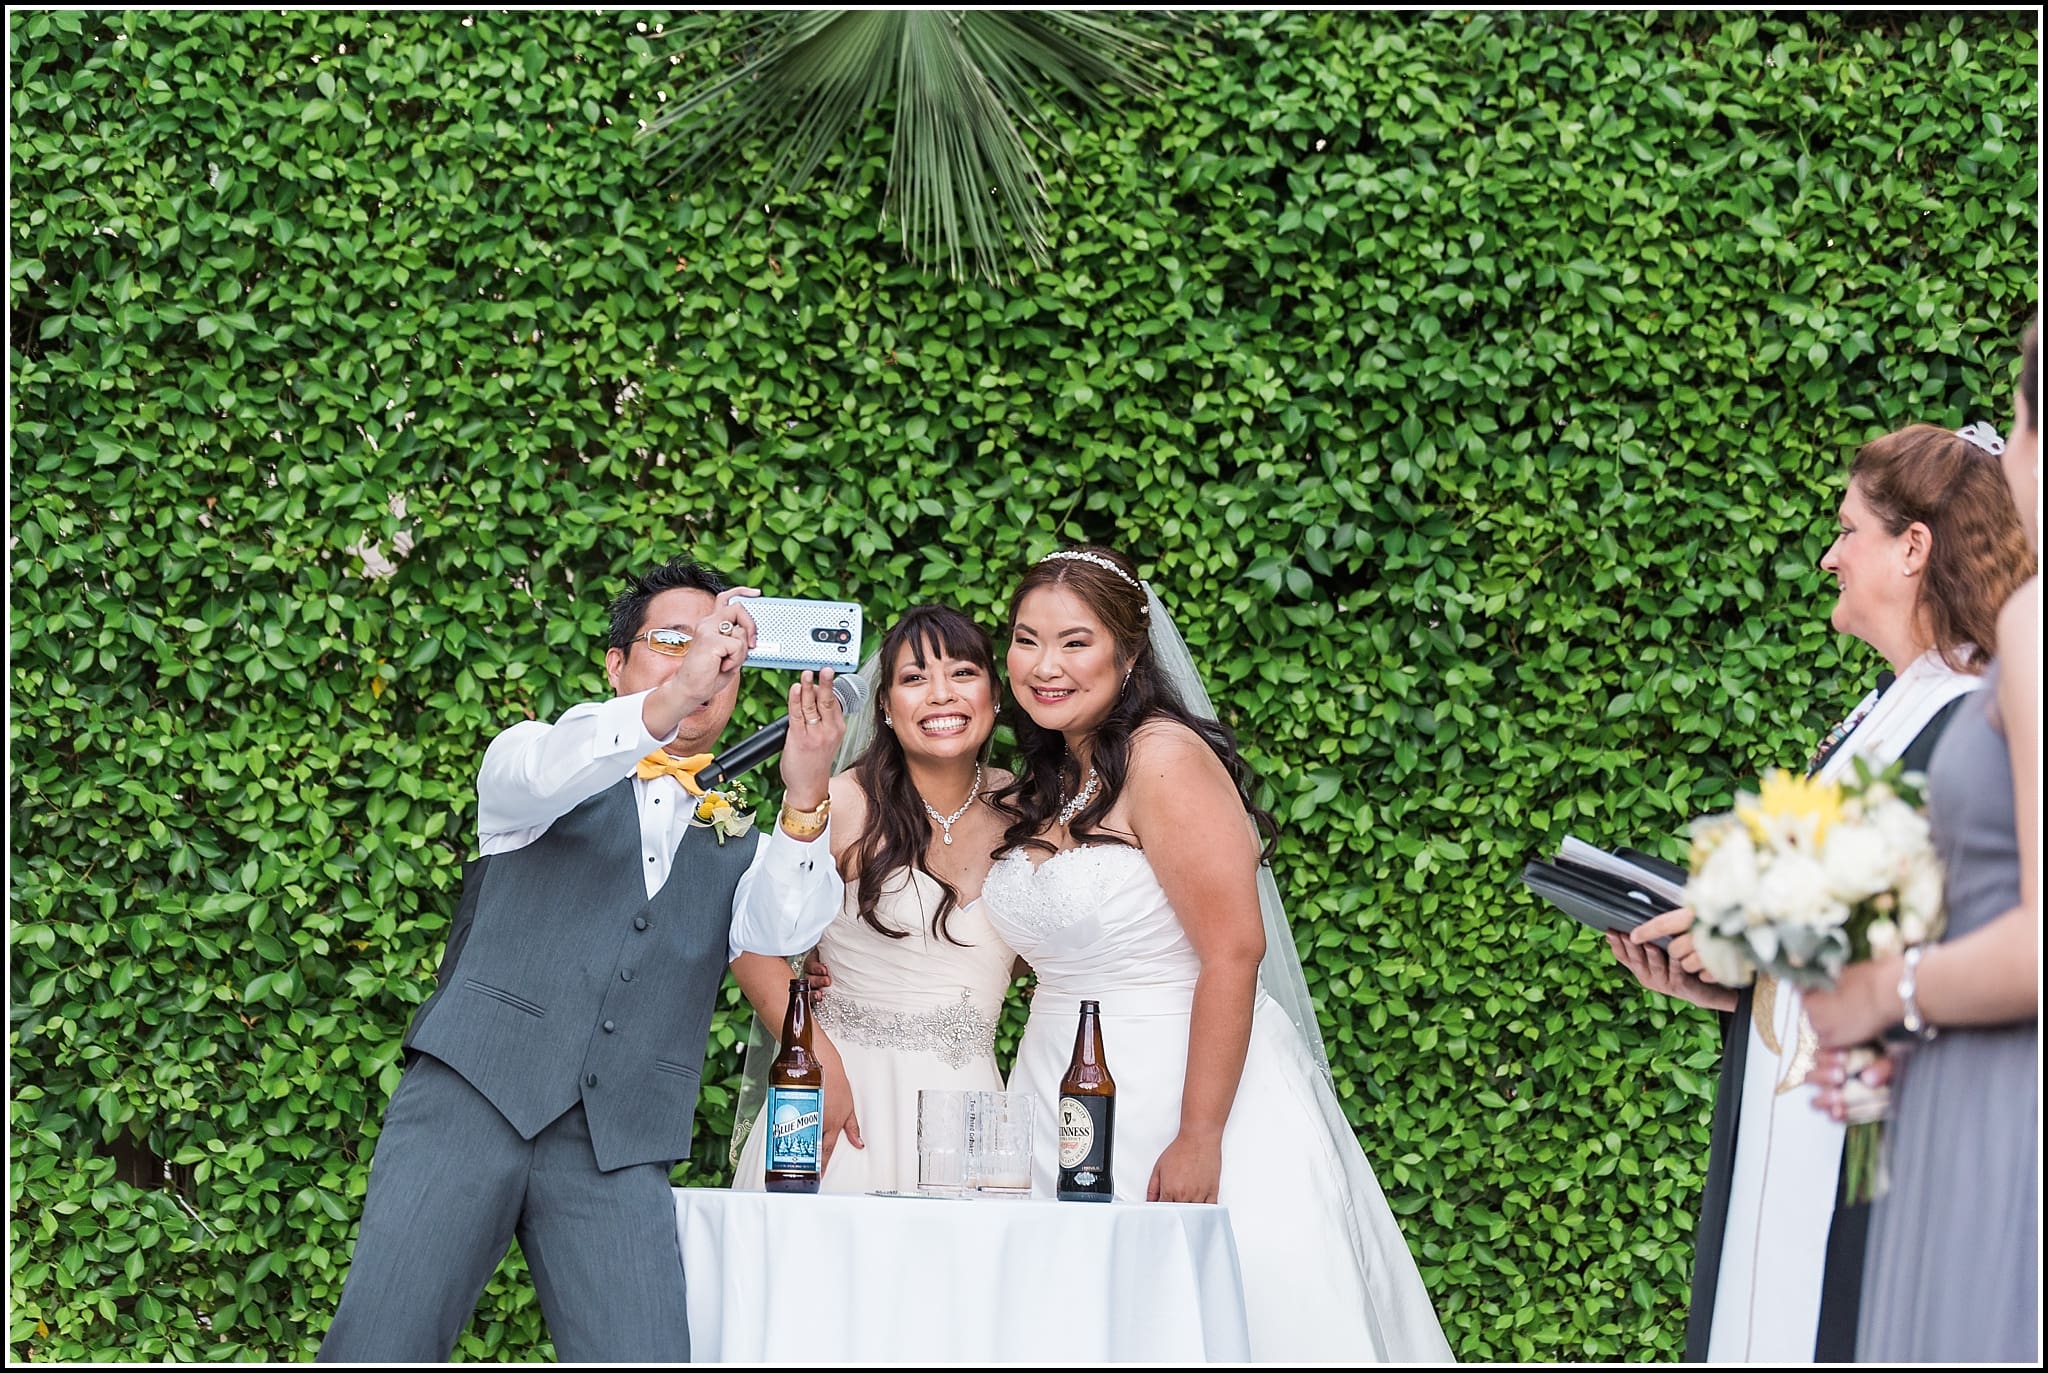  favorite wedding images 2016, wedding photos from 2016, our favorite wedding photos, wedding ceremony photo bomb